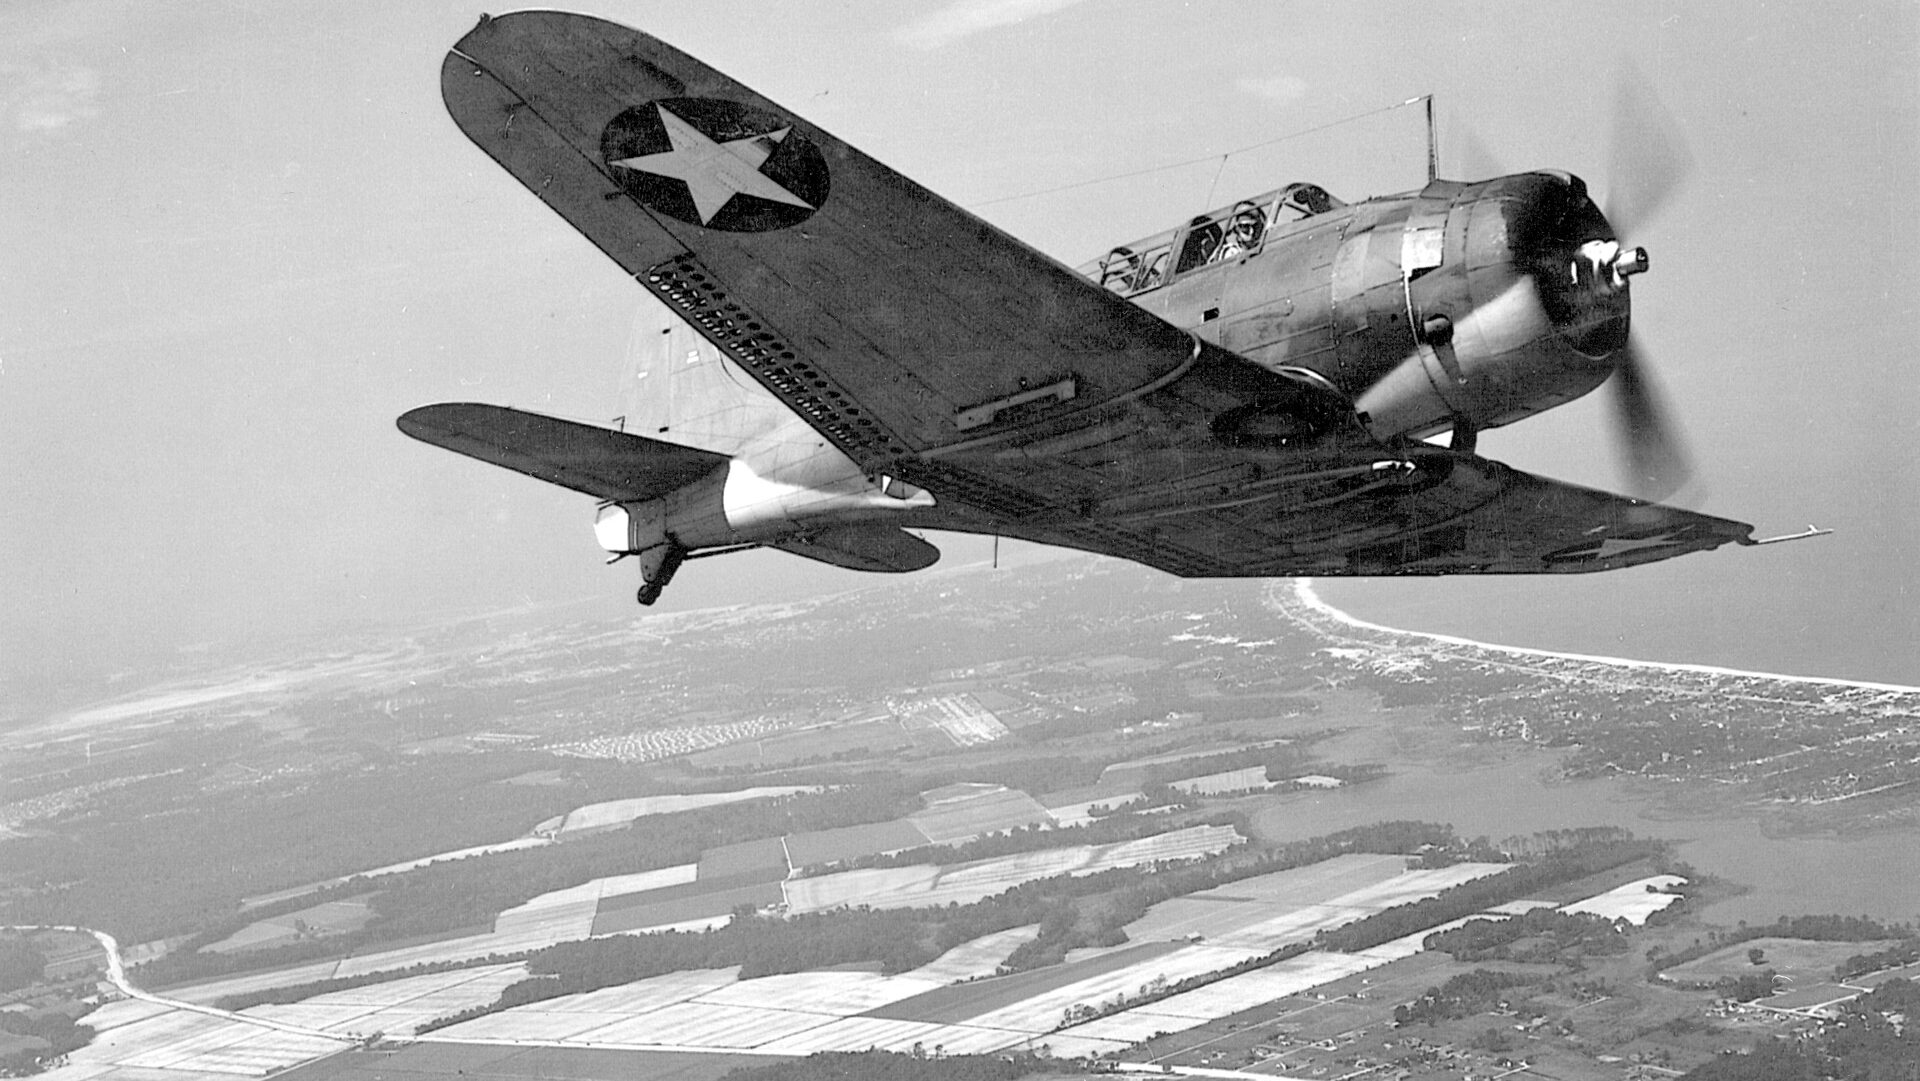 An SBD flies over the environs of Norfolk, Va. Visible are the split dive brakes at the trailing edge of the wing so important to the stability of the aircraft in a dive-bombing run on an enemy ship.